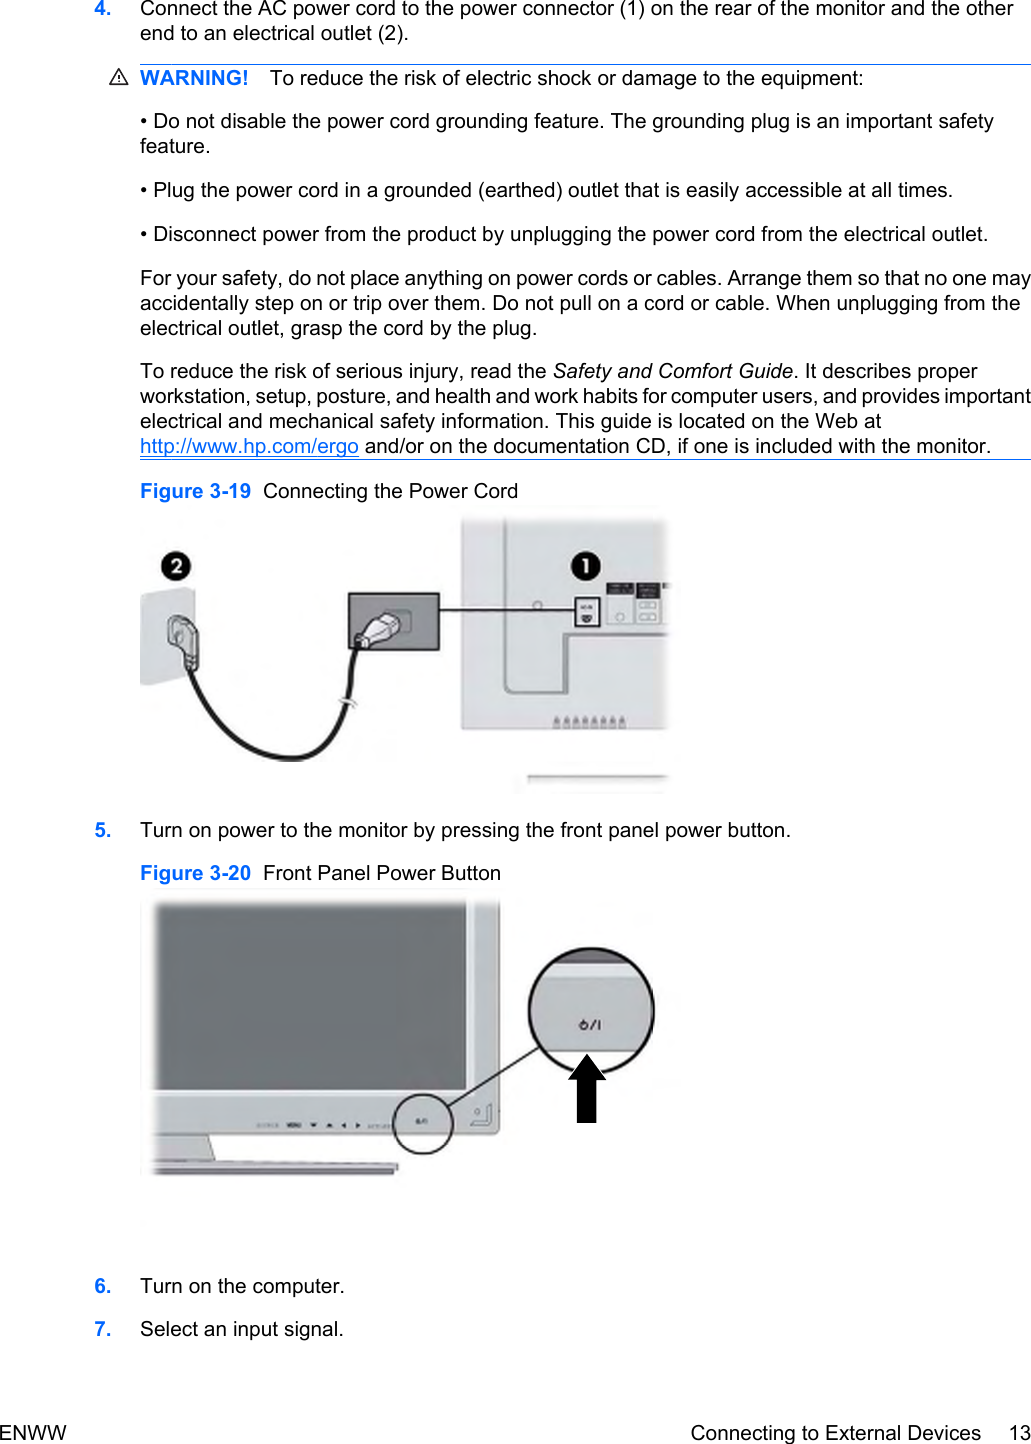 4. Connect the AC power cord to the power connector (1) on the rear of the monitor and the otherend to an electrical outlet (2).WARNING! To reduce the risk of electric shock or damage to the equipment:• Do not disable the power cord grounding feature. The grounding plug is an important safetyfeature.• Plug the power cord in a grounded (earthed) outlet that is easily accessible at all times.• Disconnect power from the product by unplugging the power cord from the electrical outlet.For your safety, do not place anything on power cords or cables. Arrange them so that no one mayaccidentally step on or trip over them. Do not pull on a cord or cable. When unplugging from theelectrical outlet, grasp the cord by the plug.To reduce the risk of serious injury, read the Safety and Comfort Guide. It describes properworkstation, setup, posture, and health and work habits for computer users, and provides importantelectrical and mechanical safety information. This guide is located on the Web athttp://www.hp.com/ergo and/or on the documentation CD, if one is included with the monitor.Figure 3-19  Connecting the Power Cord5. Turn on power to the monitor by pressing the front panel power button.Figure 3-20  Front Panel Power Button6. Turn on the computer.7. Select an input signal.ENWW Connecting to External Devices 13